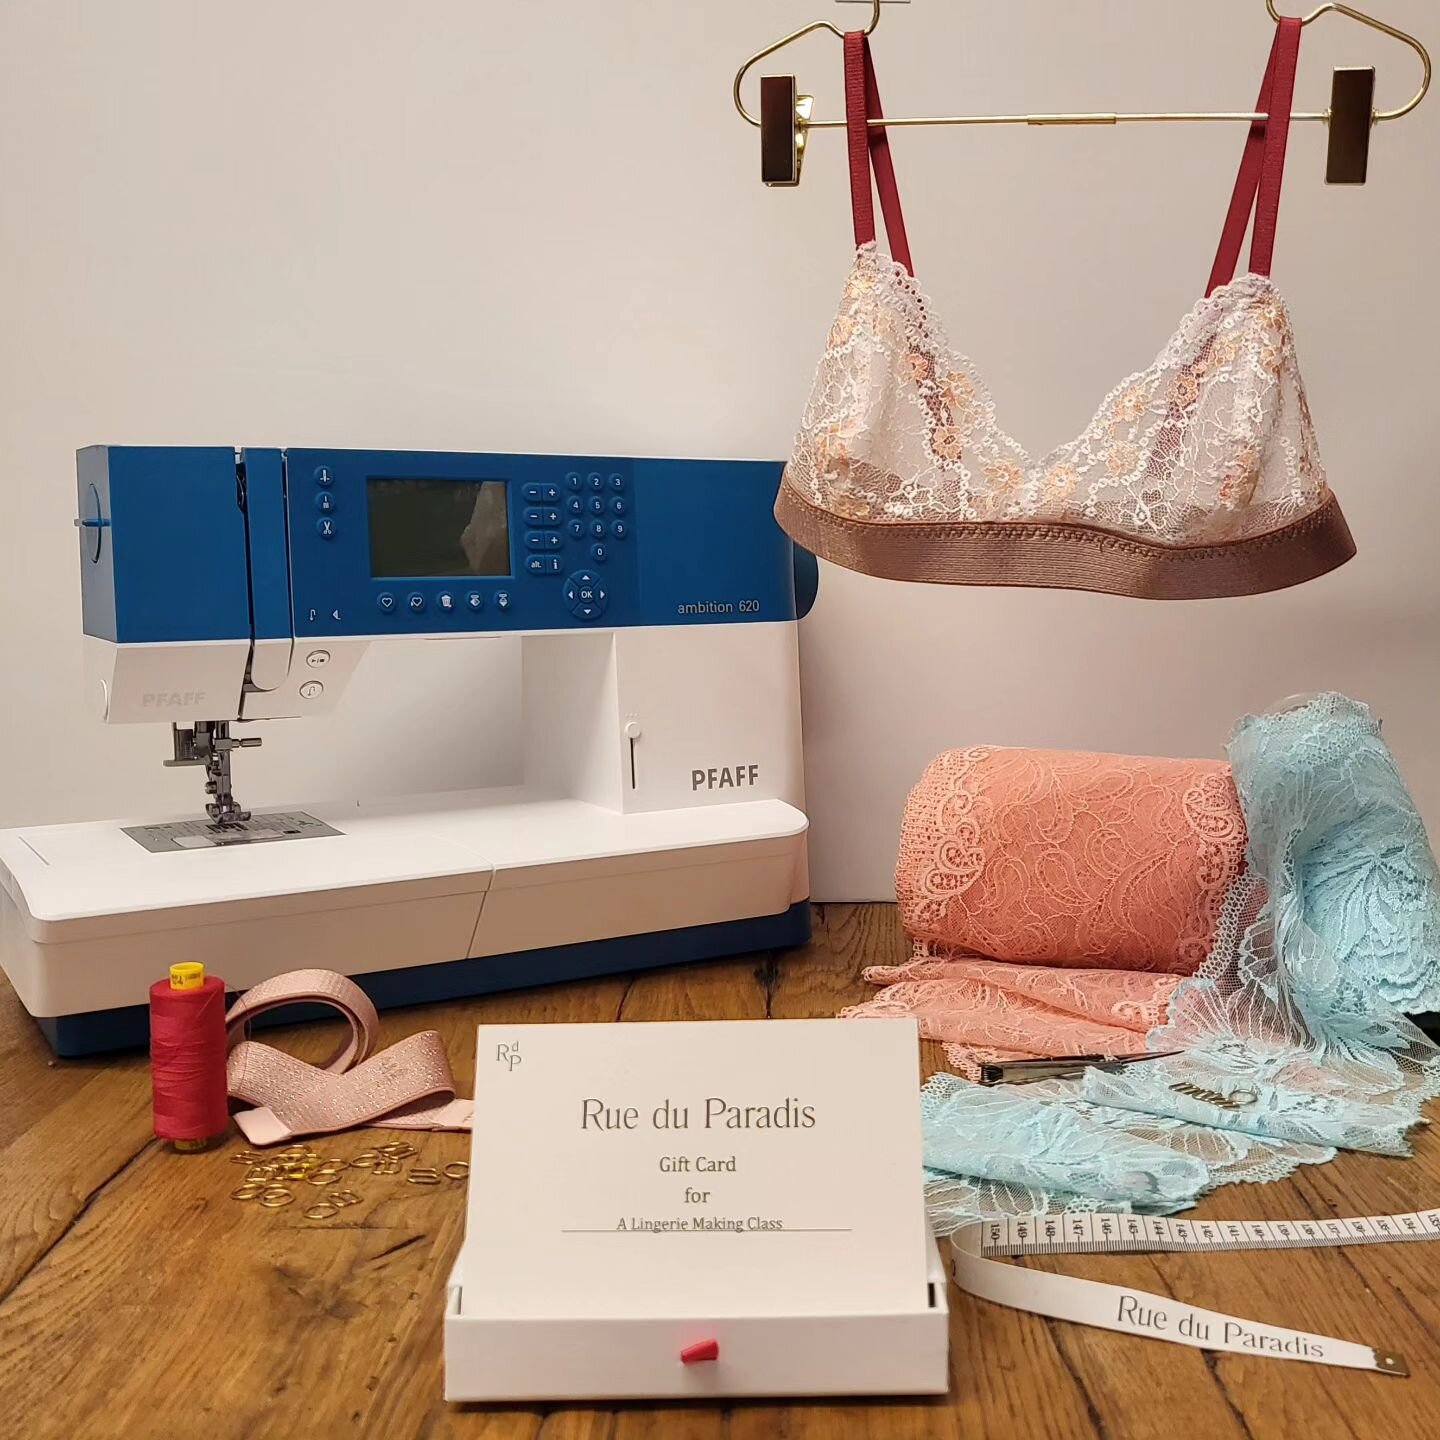 Our best selling gift: lingerie workshops! Whether for a friend, a significant other or a family member, this gift is an ode to self love. The workshops are nor only soothing to the mind, they also result in a learned craft and a beautifully fitting 